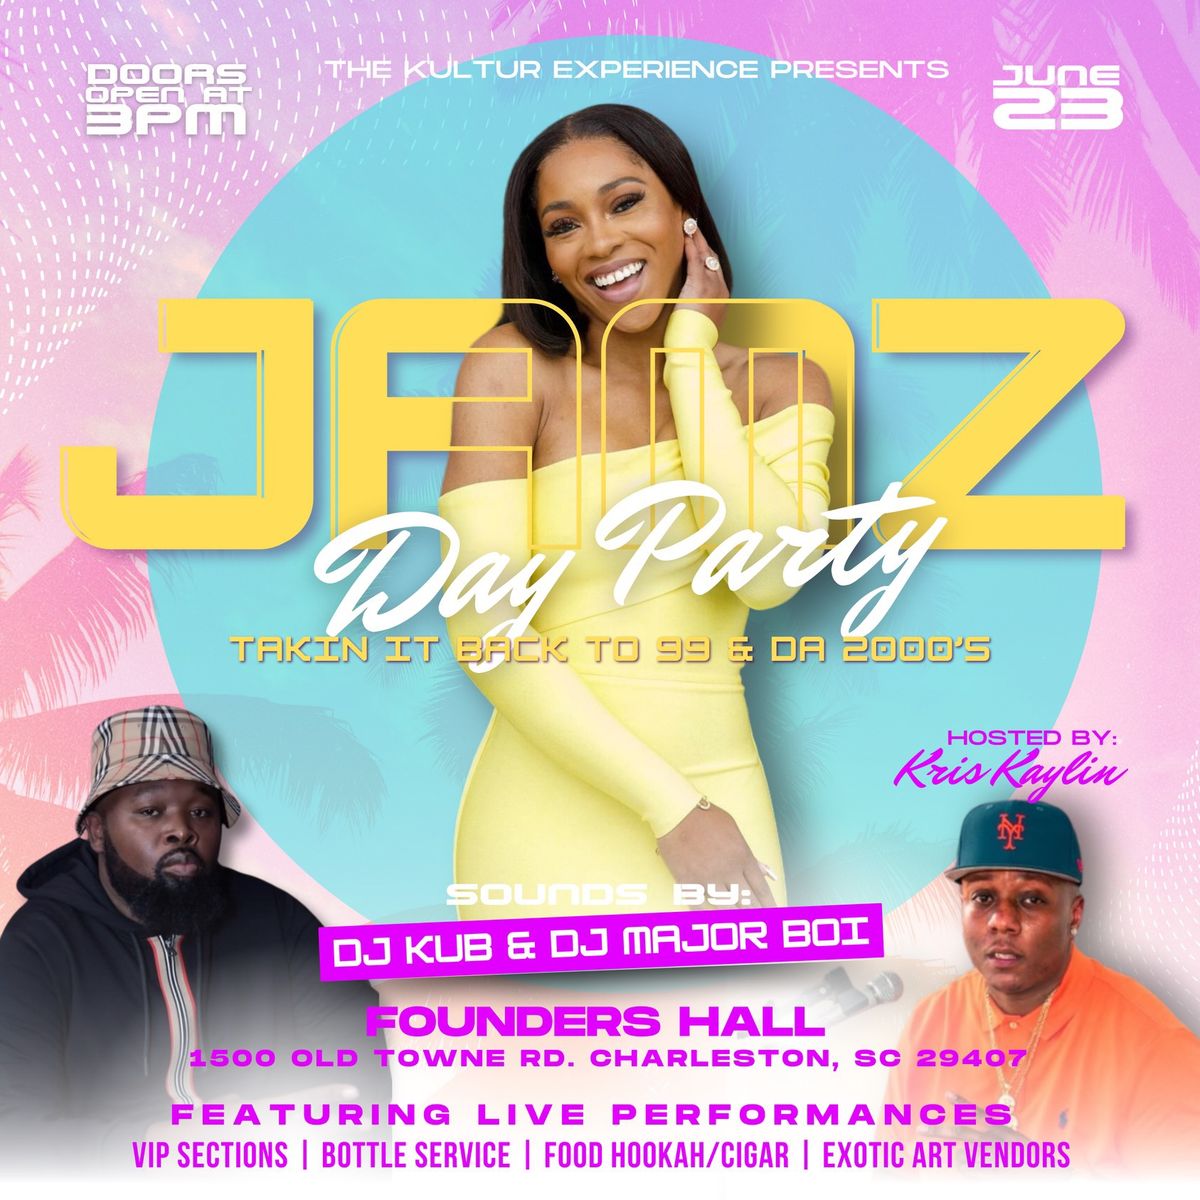 JaMz Day Party